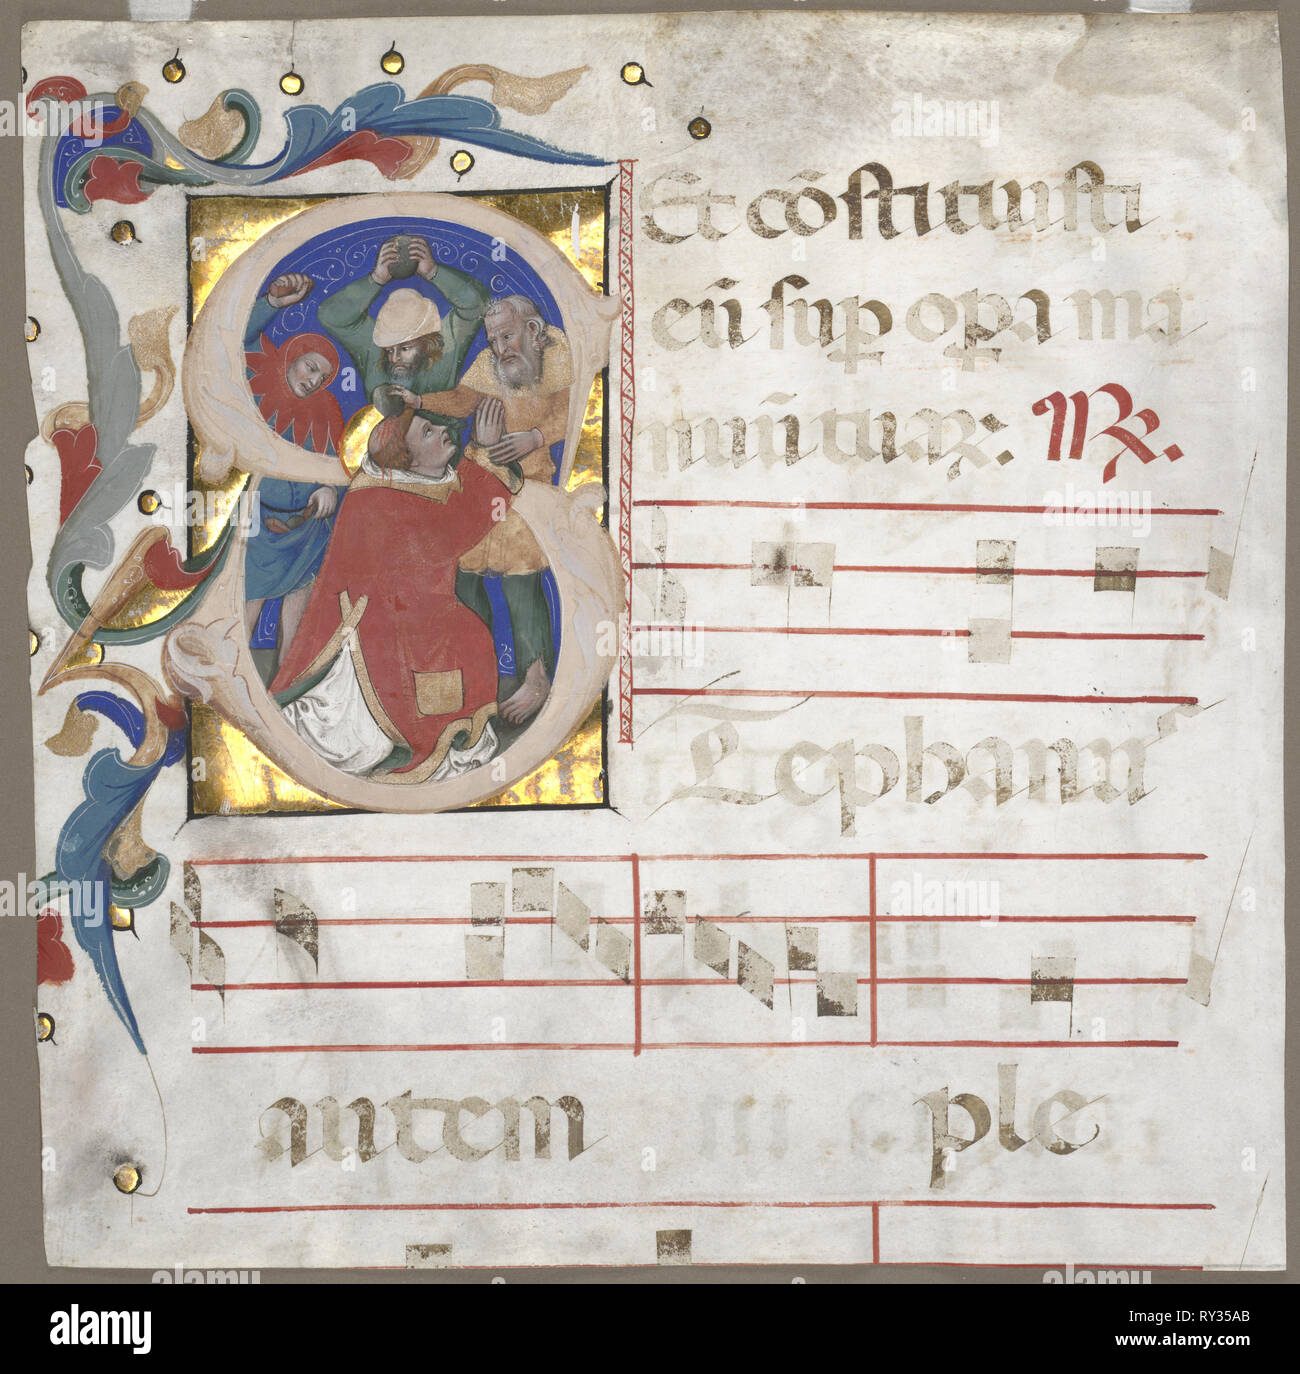 Fragment of an Antiphonary with Historiated Initial (S): The Stoning of St. Stephen, c. 1370-1372. Nicolò da Bologna (Italian, c. 1325-1403). Ink, tempera, and gold on parchment; sheet: 33 x 33 cm (13 x 13 in Stock Photo